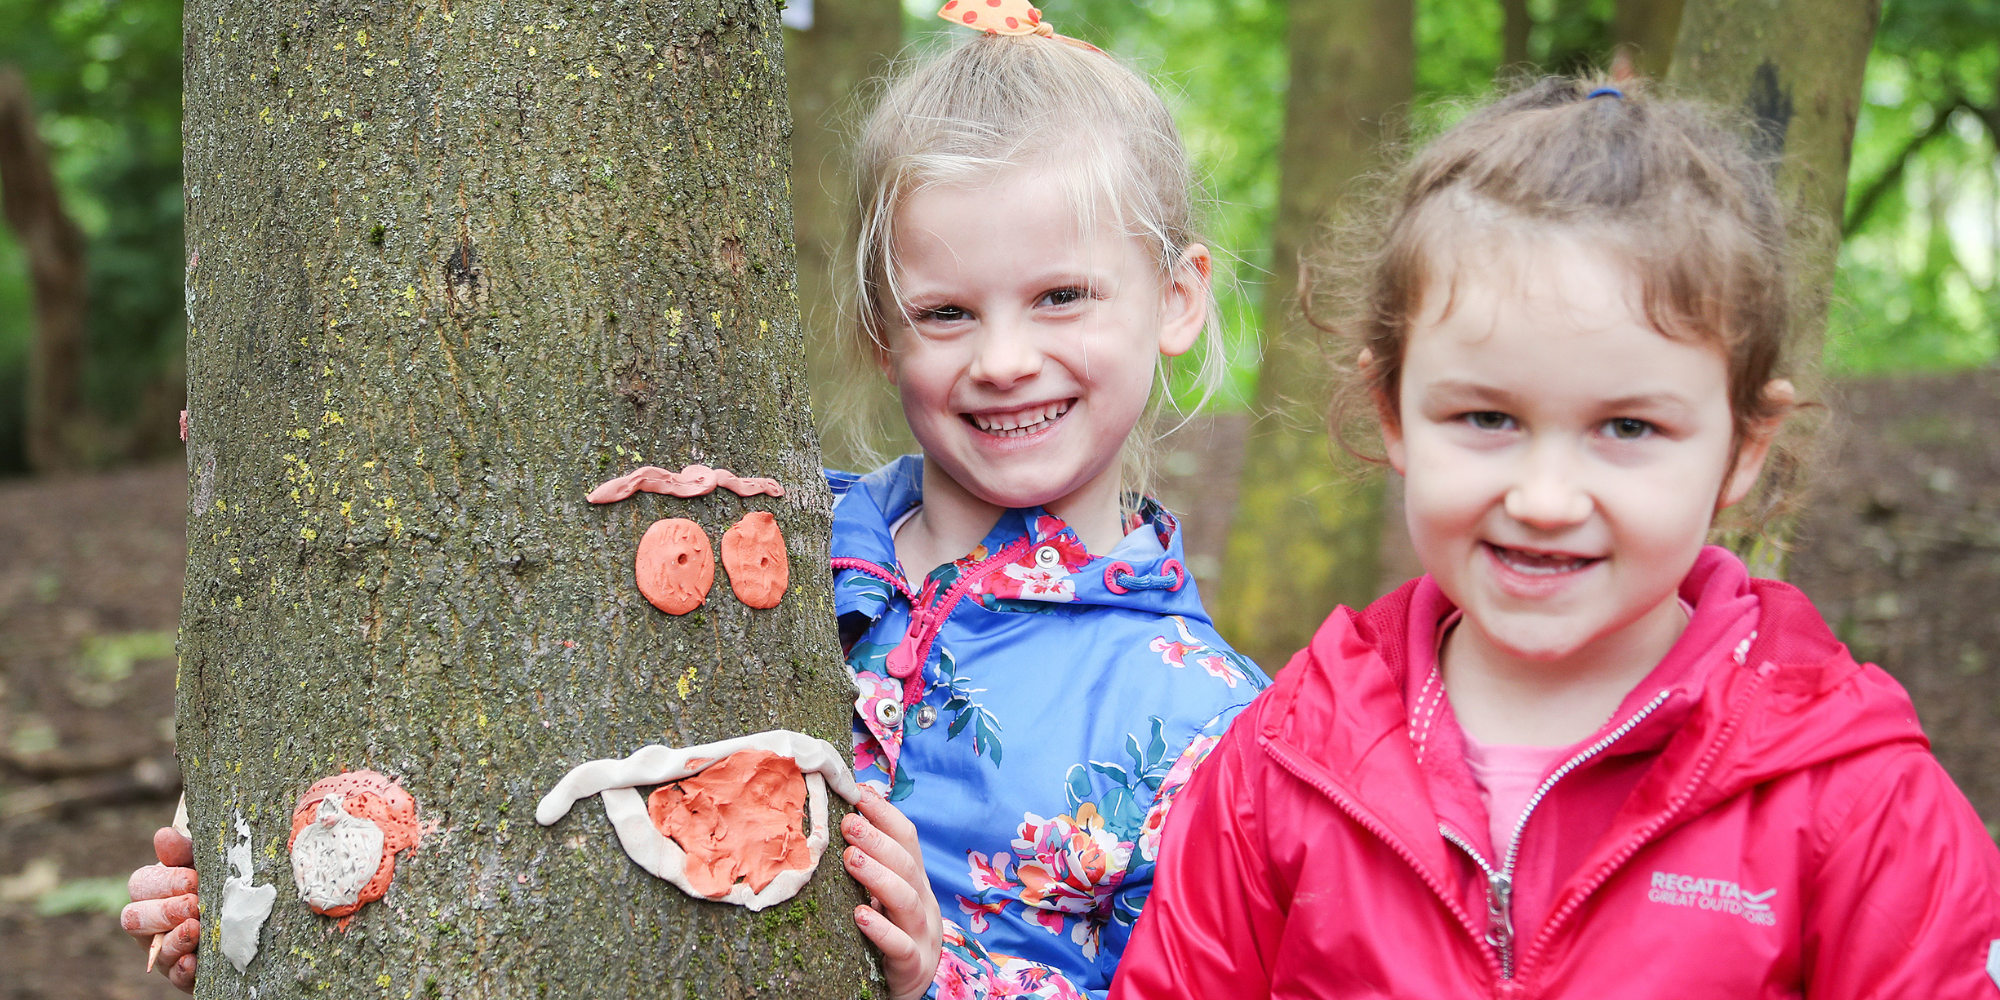 A couple of Wildtribe children creating faces on trees with art materials.